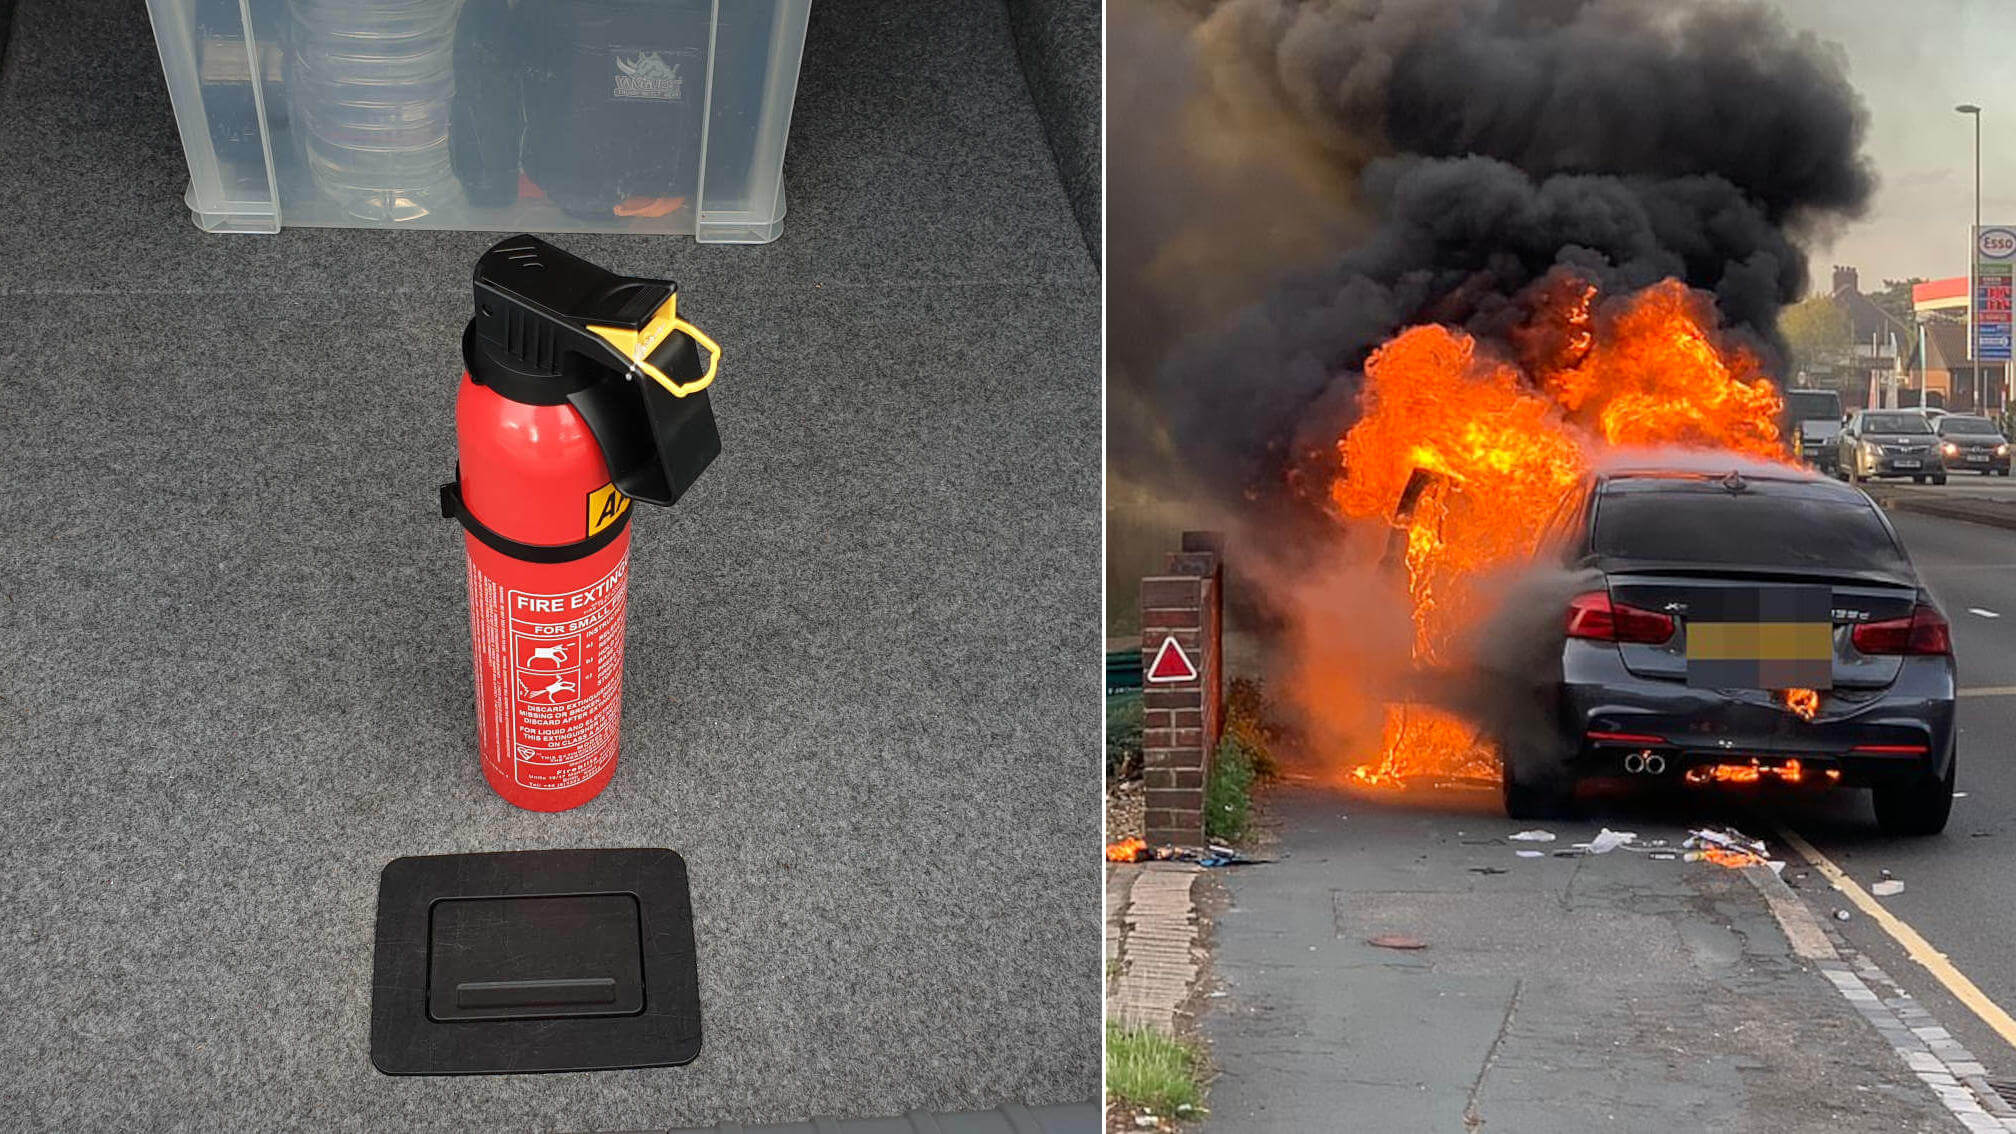 BMW car on fire in the UK, with fire extinguisher shown